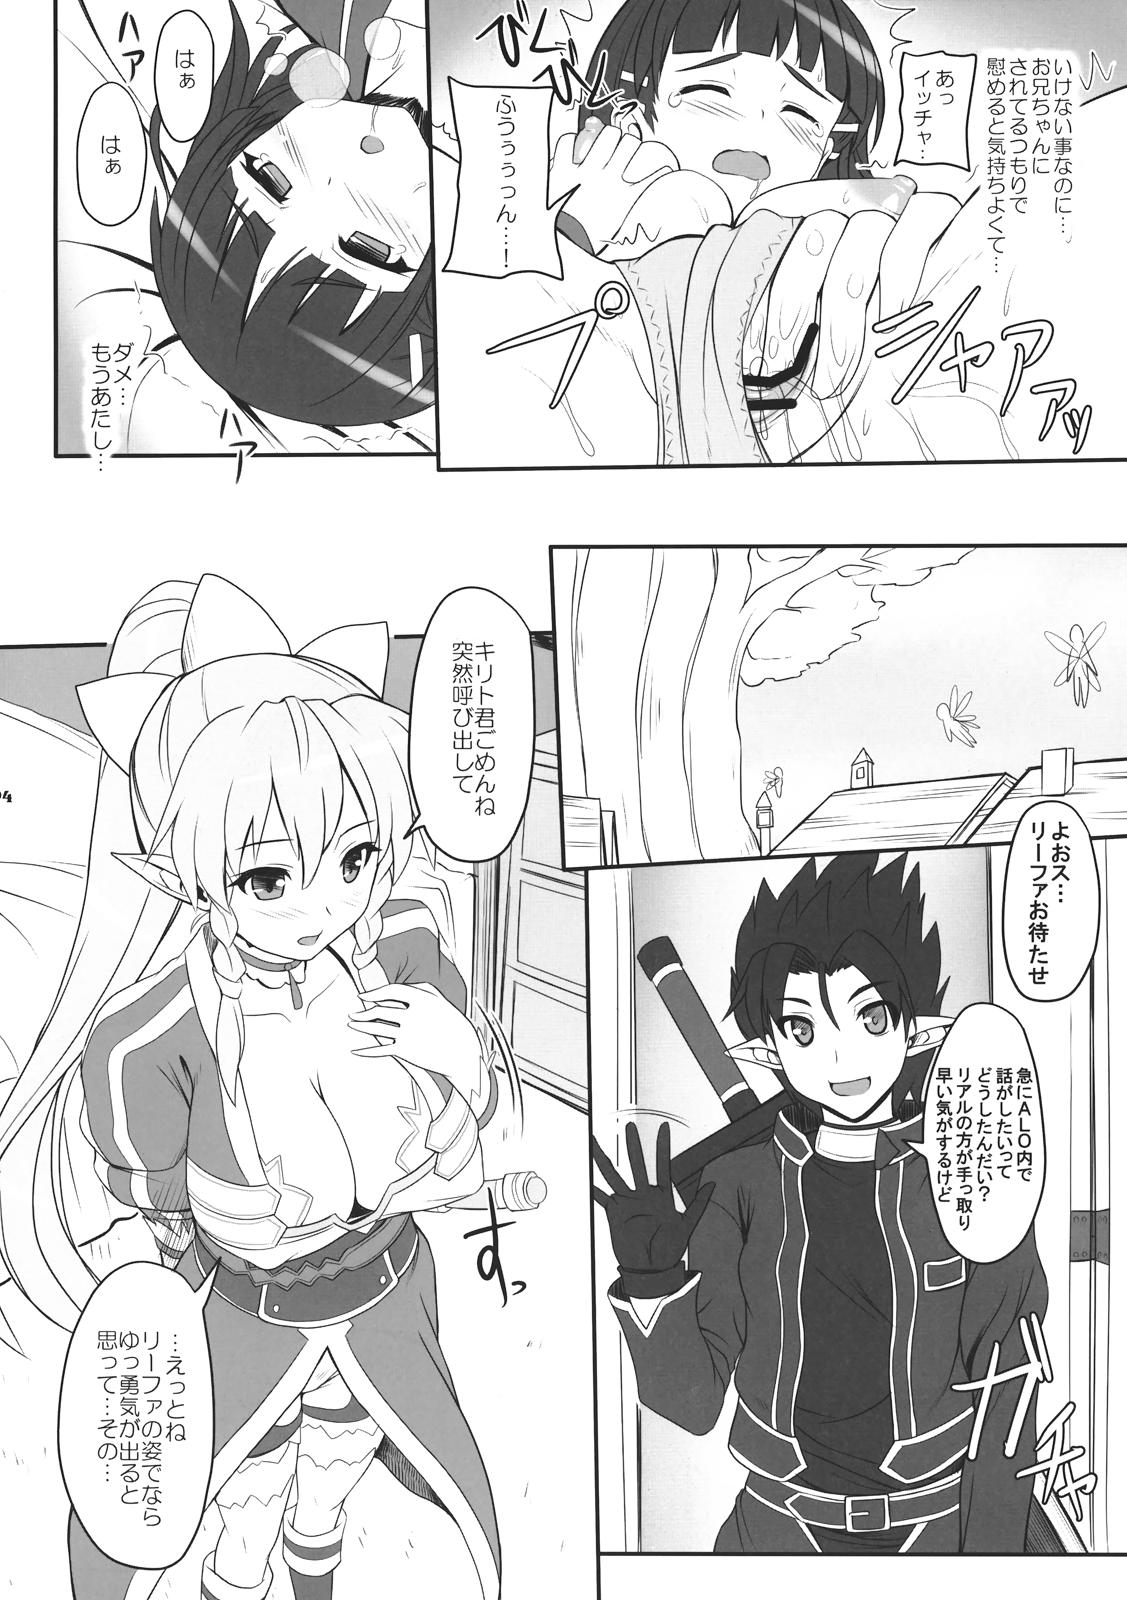 Delicia Sister Affection Online - Sword art online 3some - Page 6